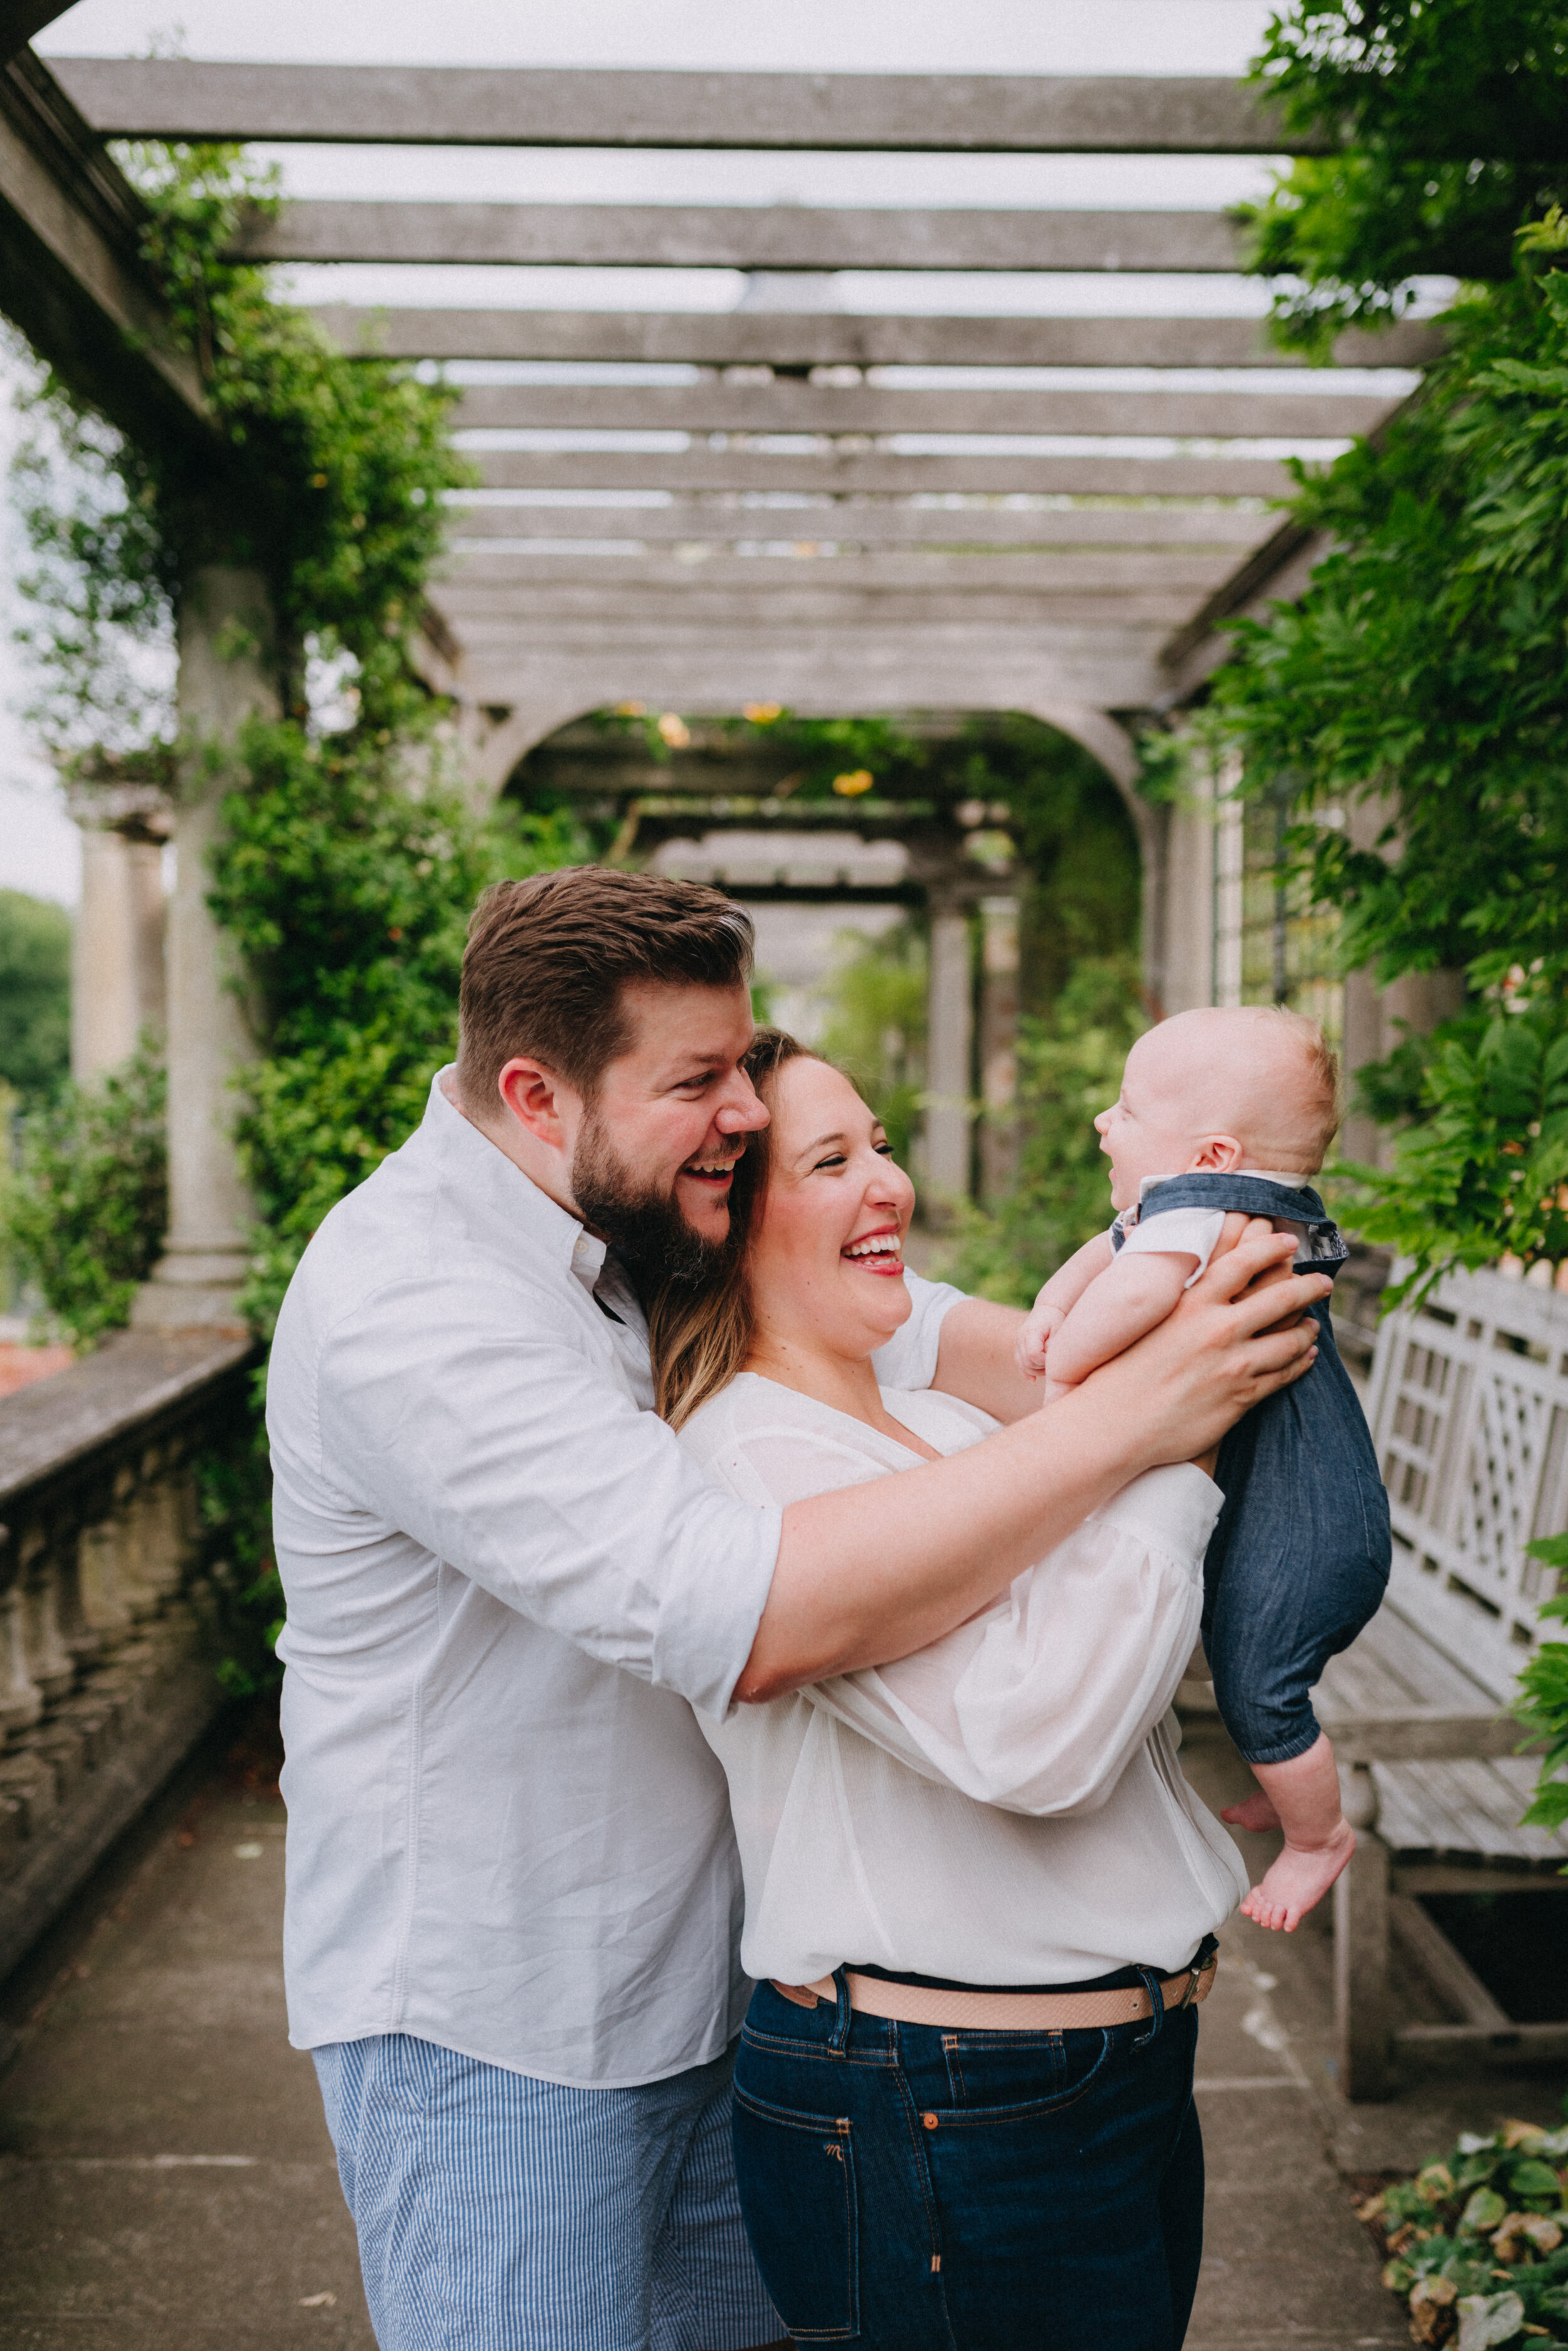 Natural family portrait photographer in London